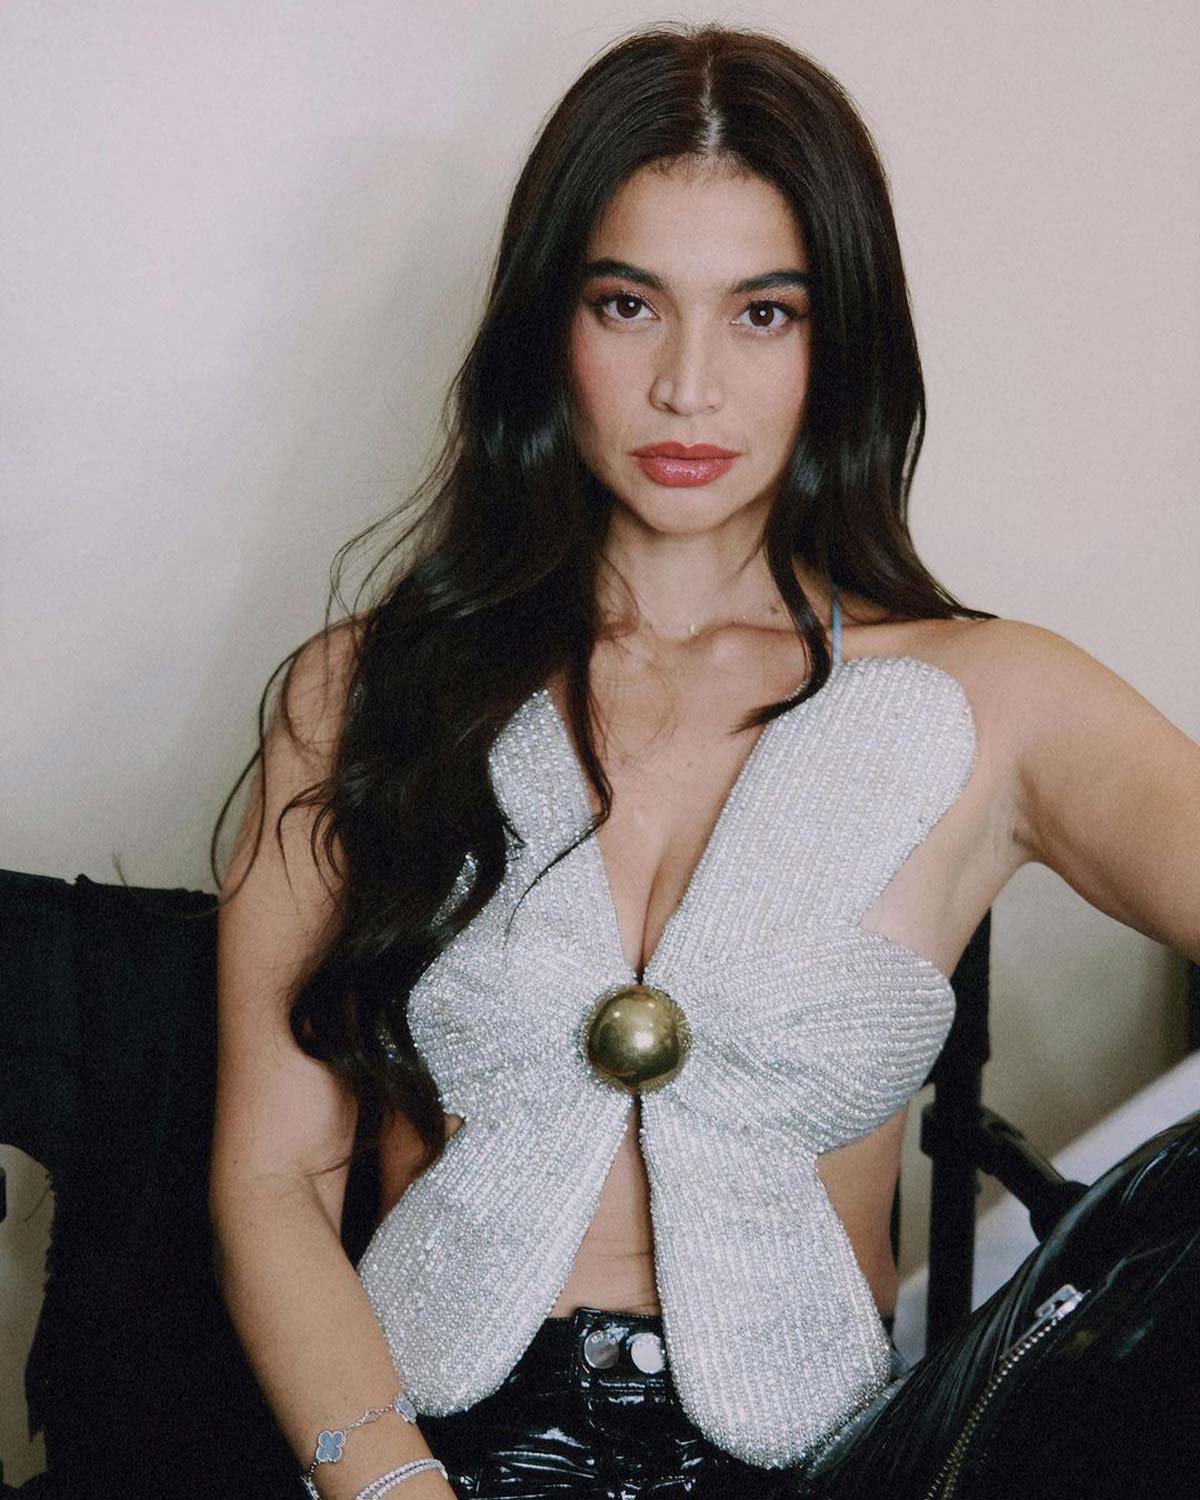 anne curtis it's showtime comeback outfits exact designer pieces